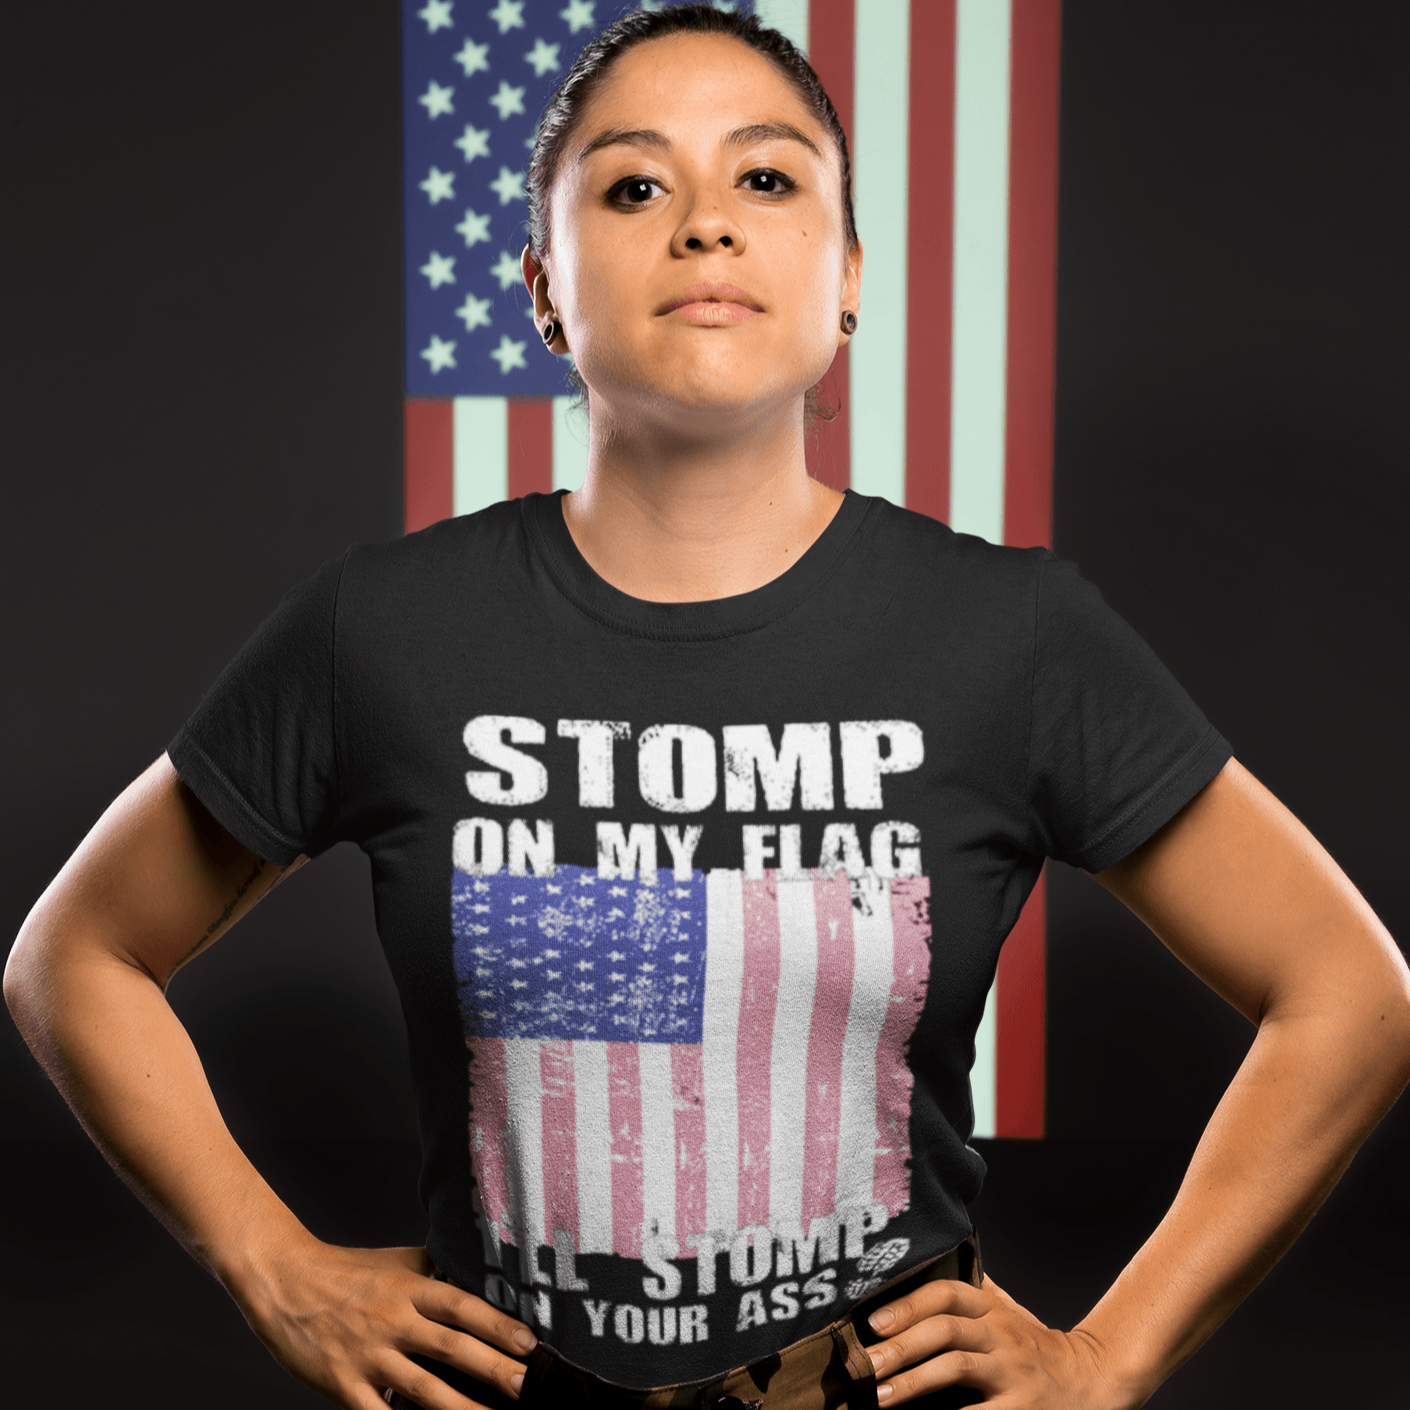 Patriotic T-shirt Stomp on My Flag and I'll Stomp on Your Ass - TopKoalaTee